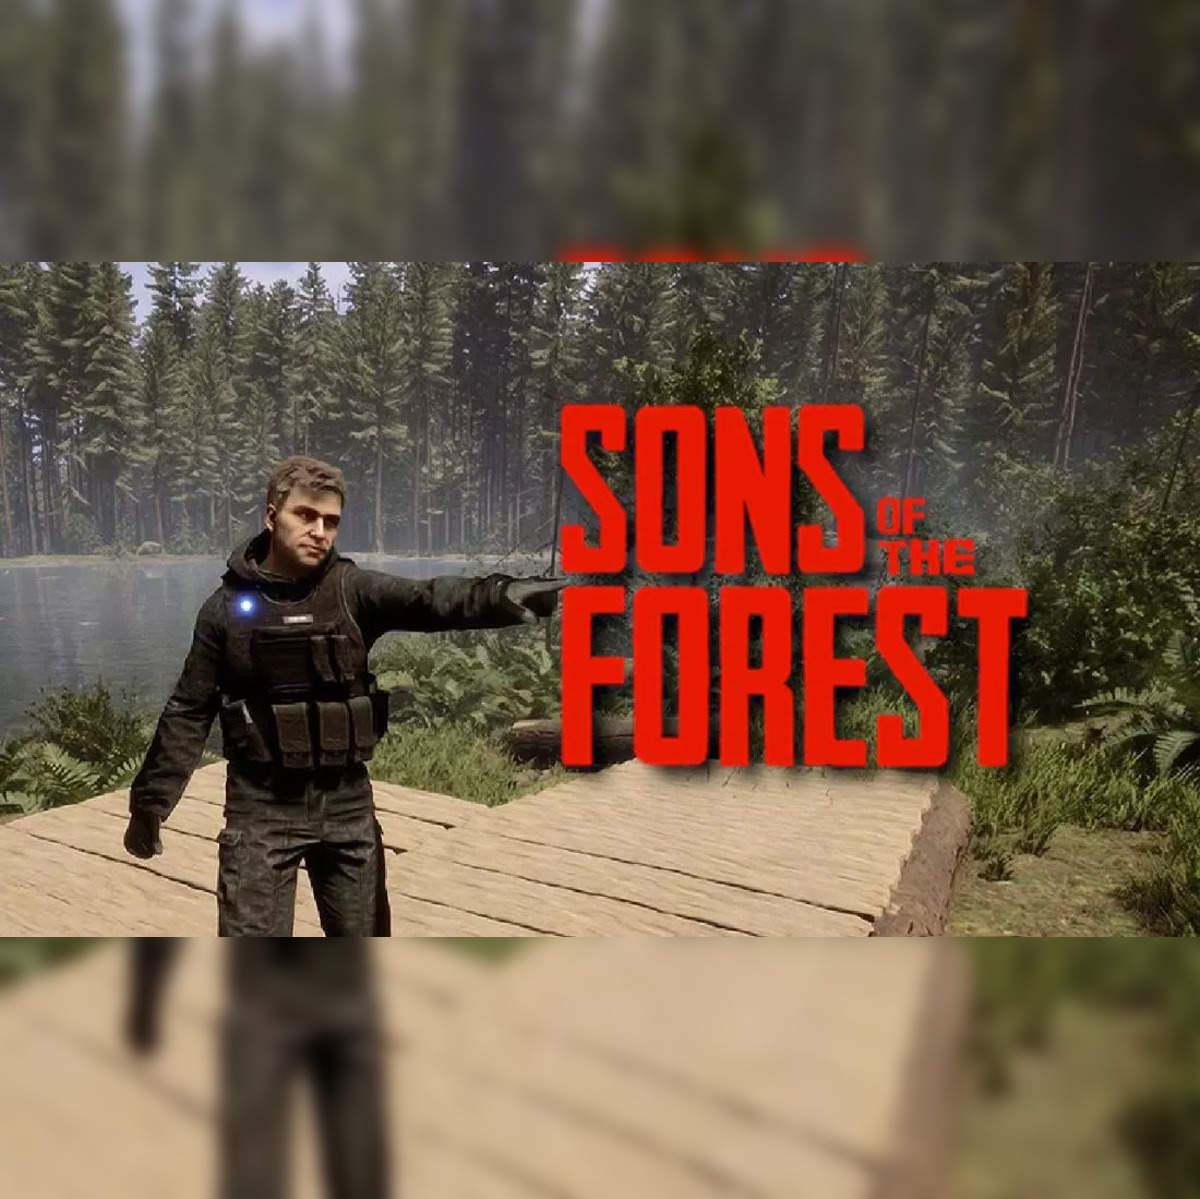 Sons of the Forest, Sequel to The Forest, Gets New Trailer & 2021 Release  Date